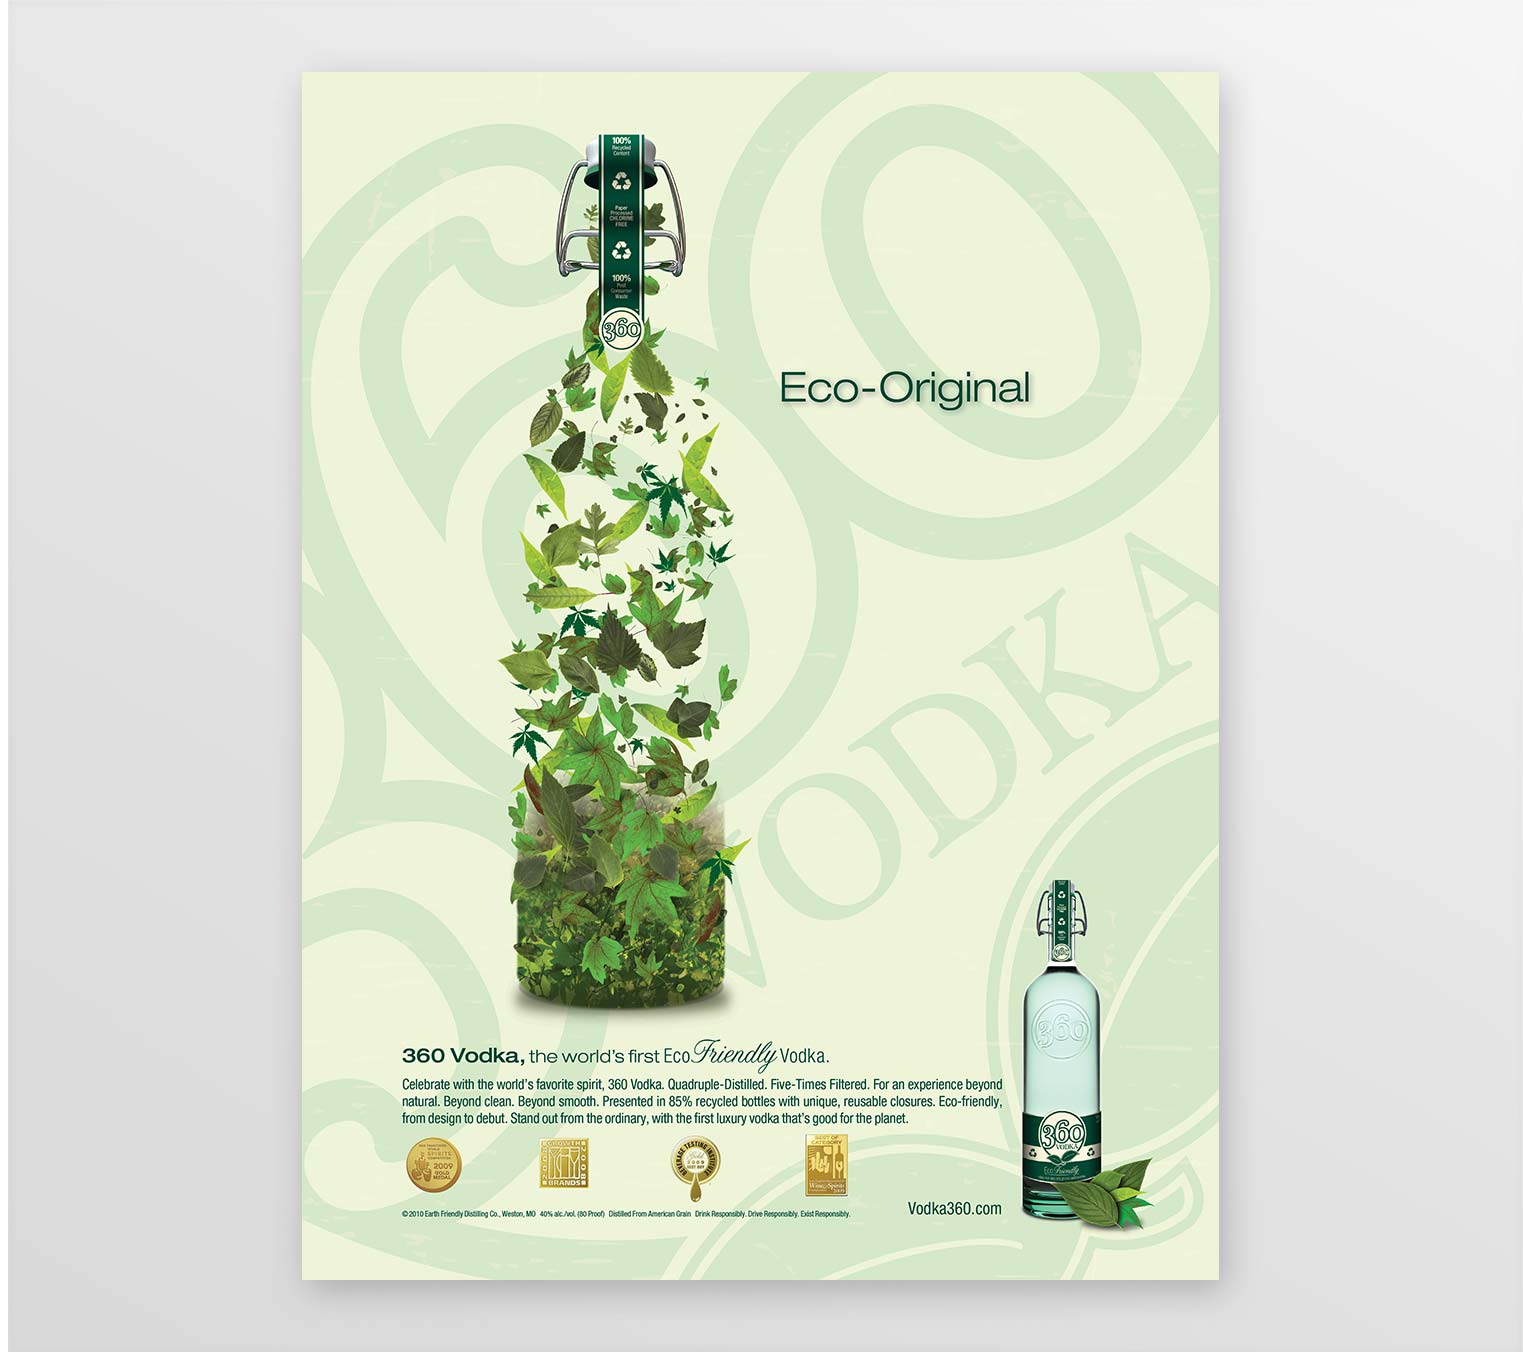 360 Vodka print advertising showing a bottle made out of leaves